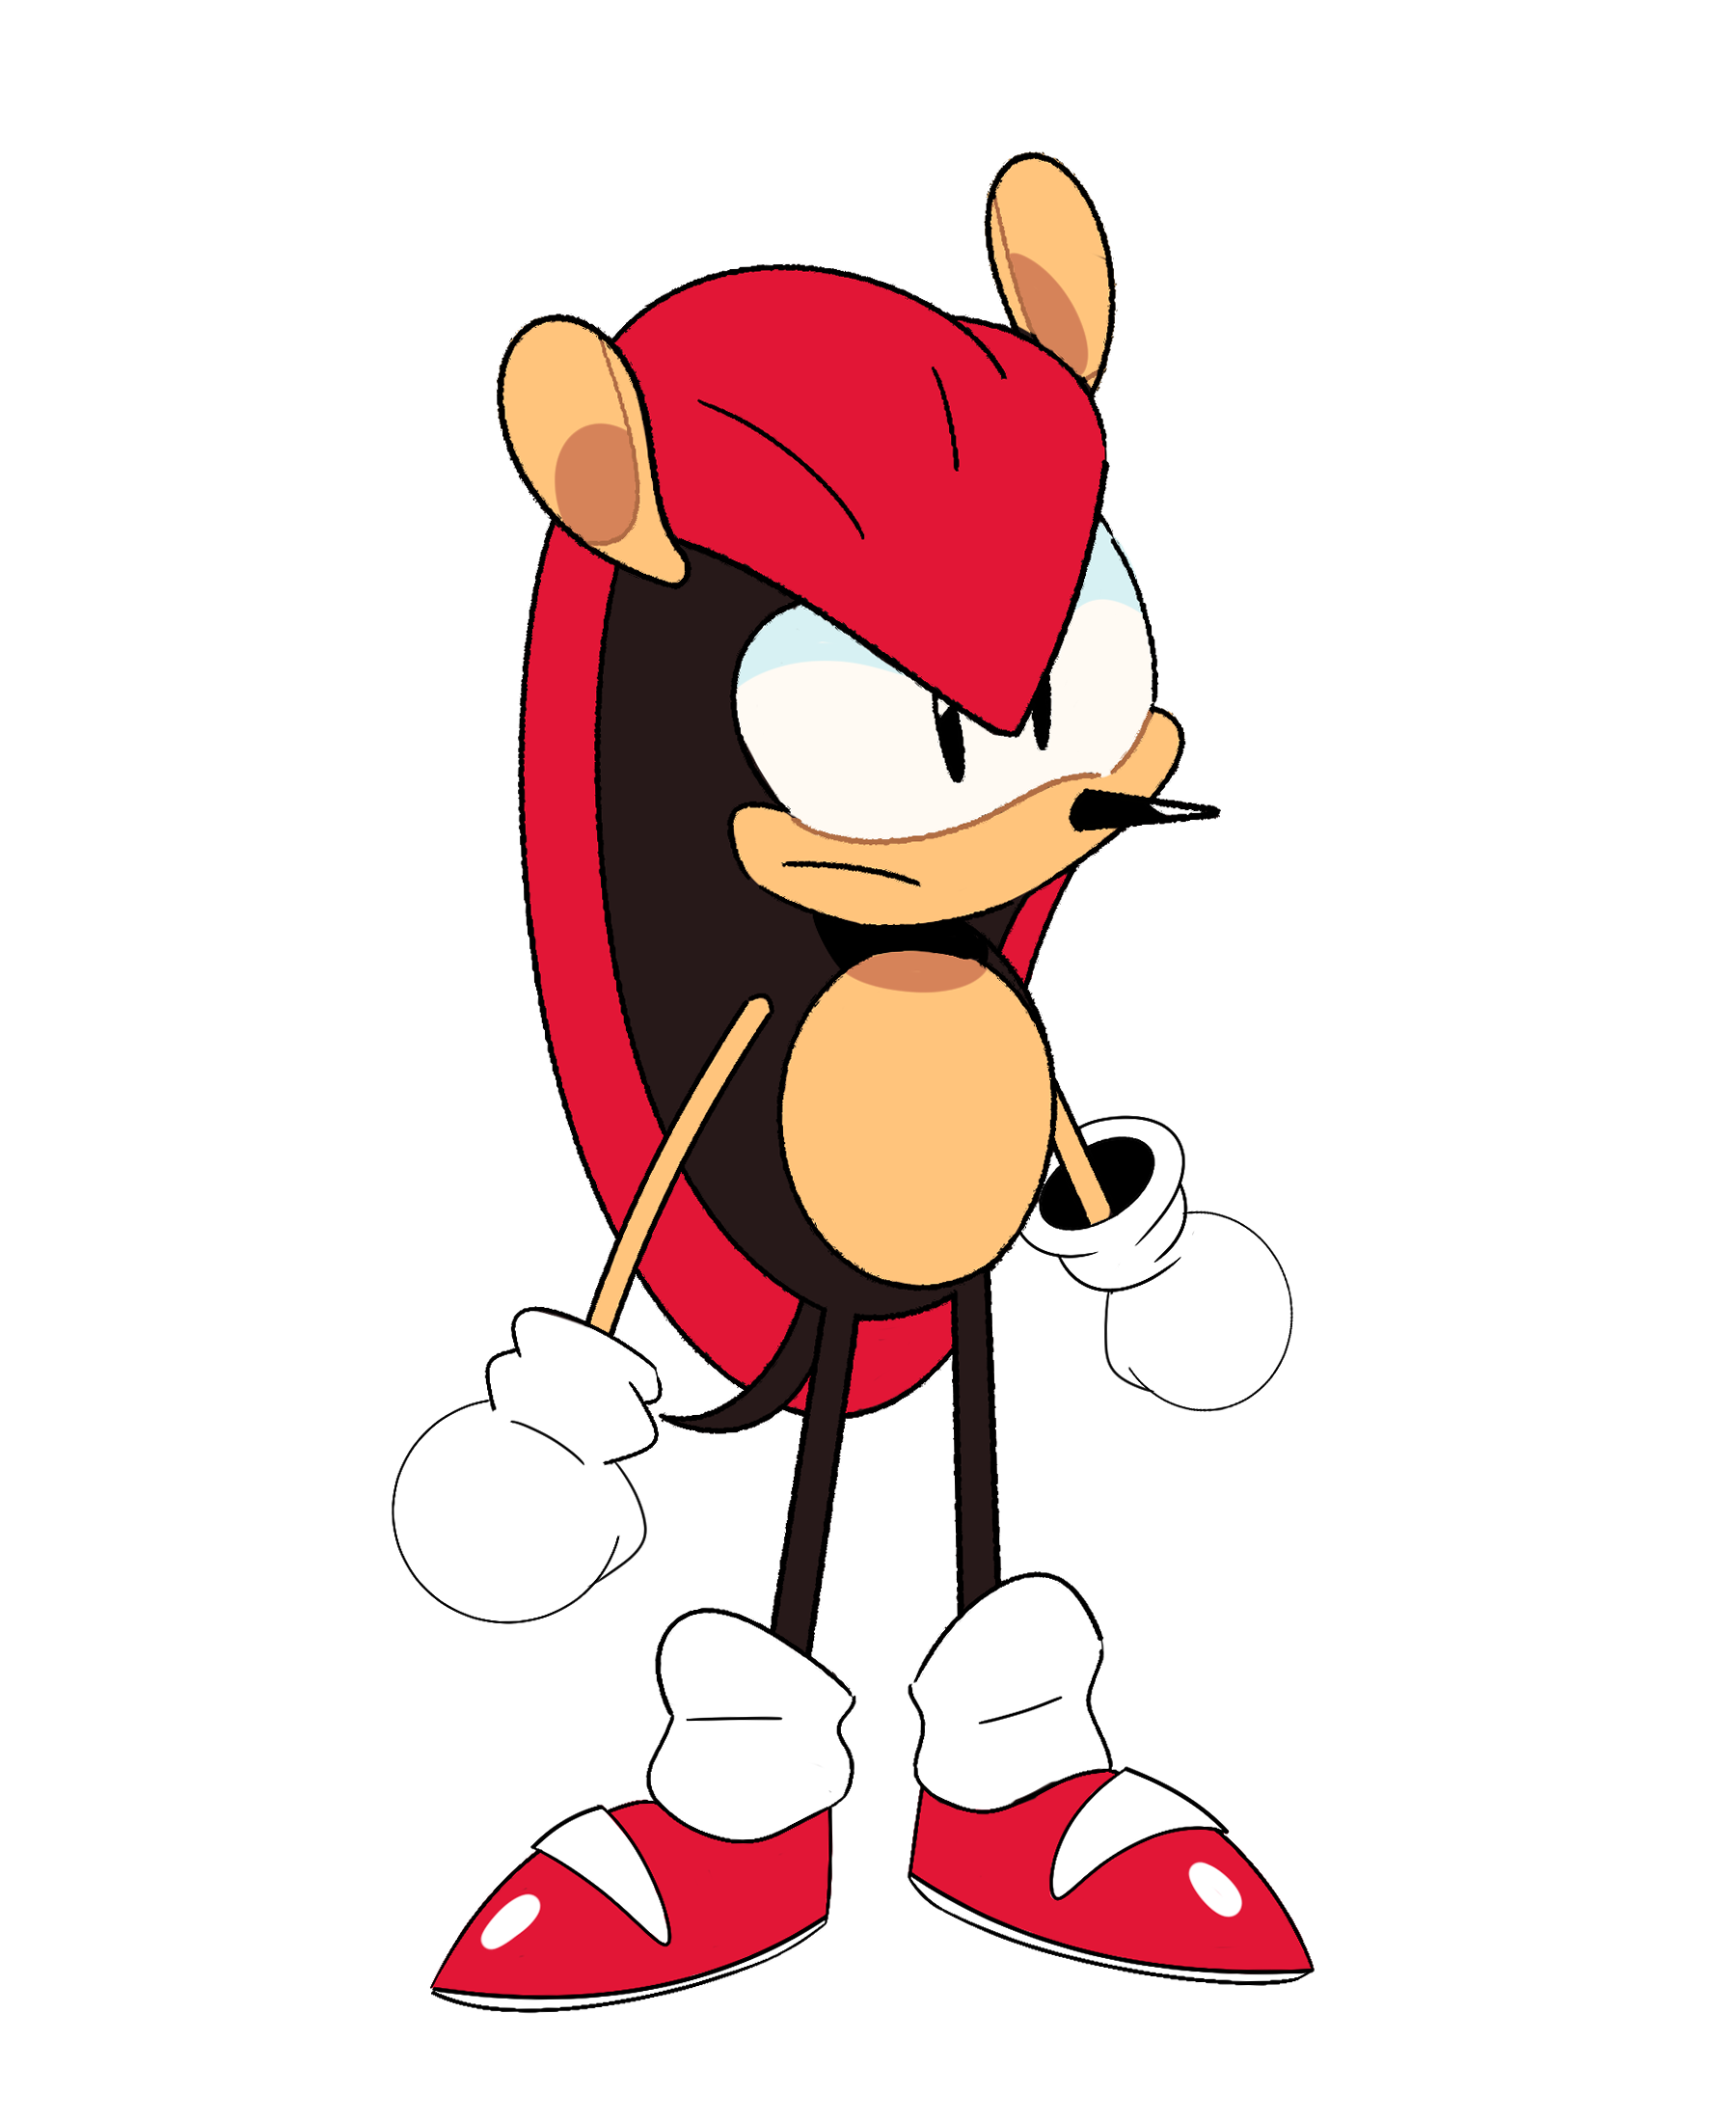 Mighty the Armadillo (Sonic Channel) by JadyellySparkle on DeviantArt